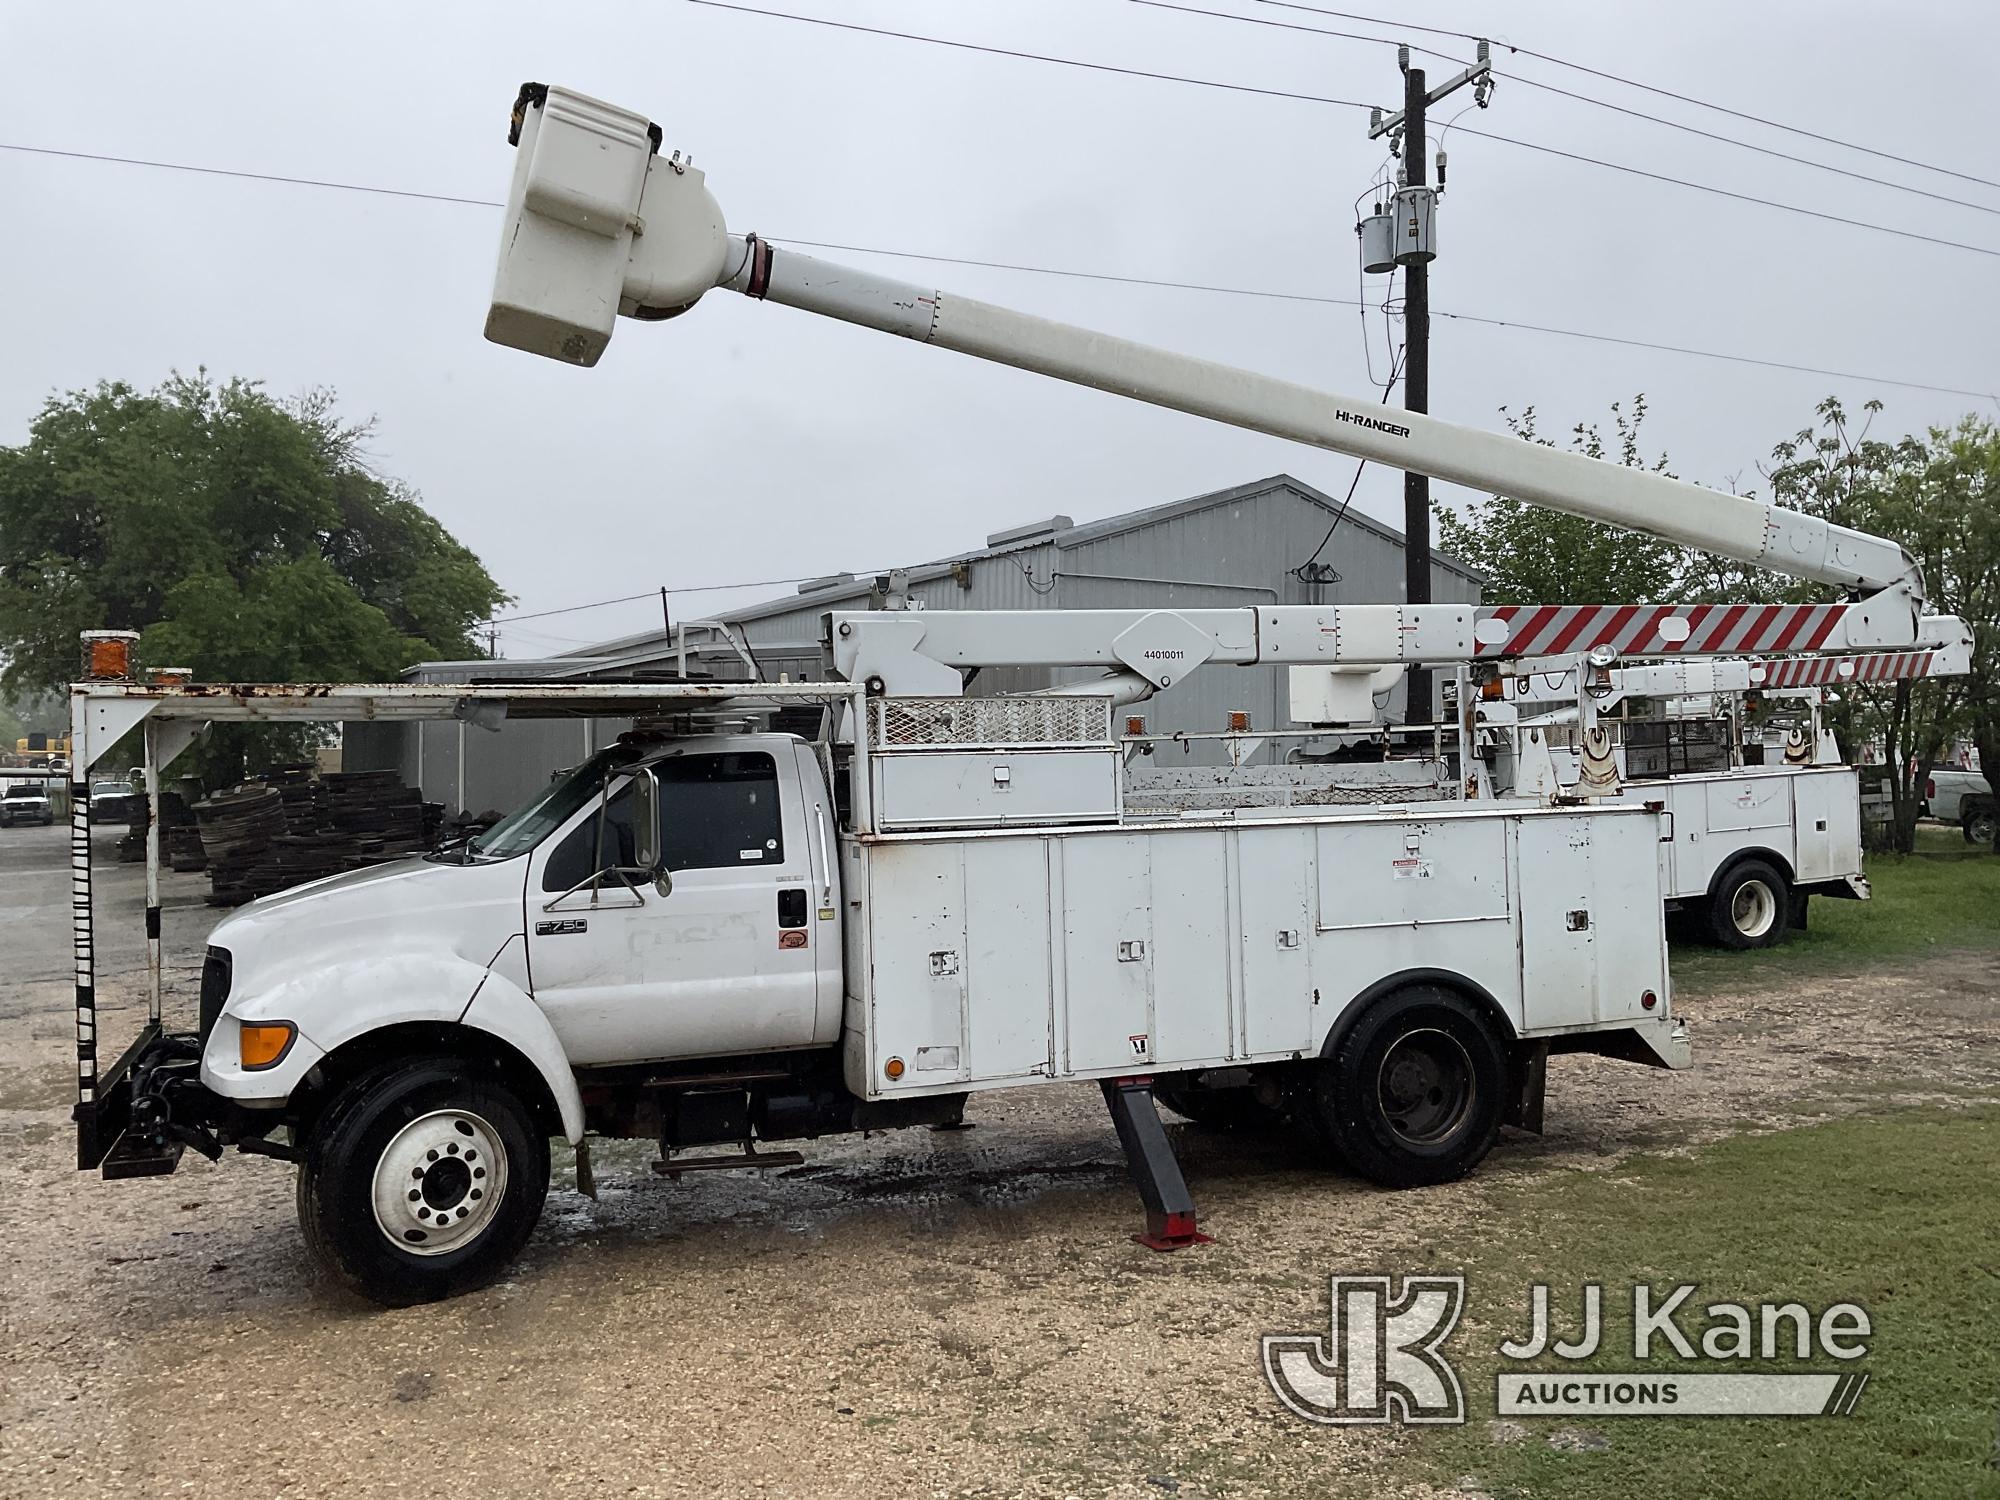 (San Antonio, TX) Terex/Telelect HiRanger 5FC-55, Bucket Truck mounted behind cab on 2003 Ford F750